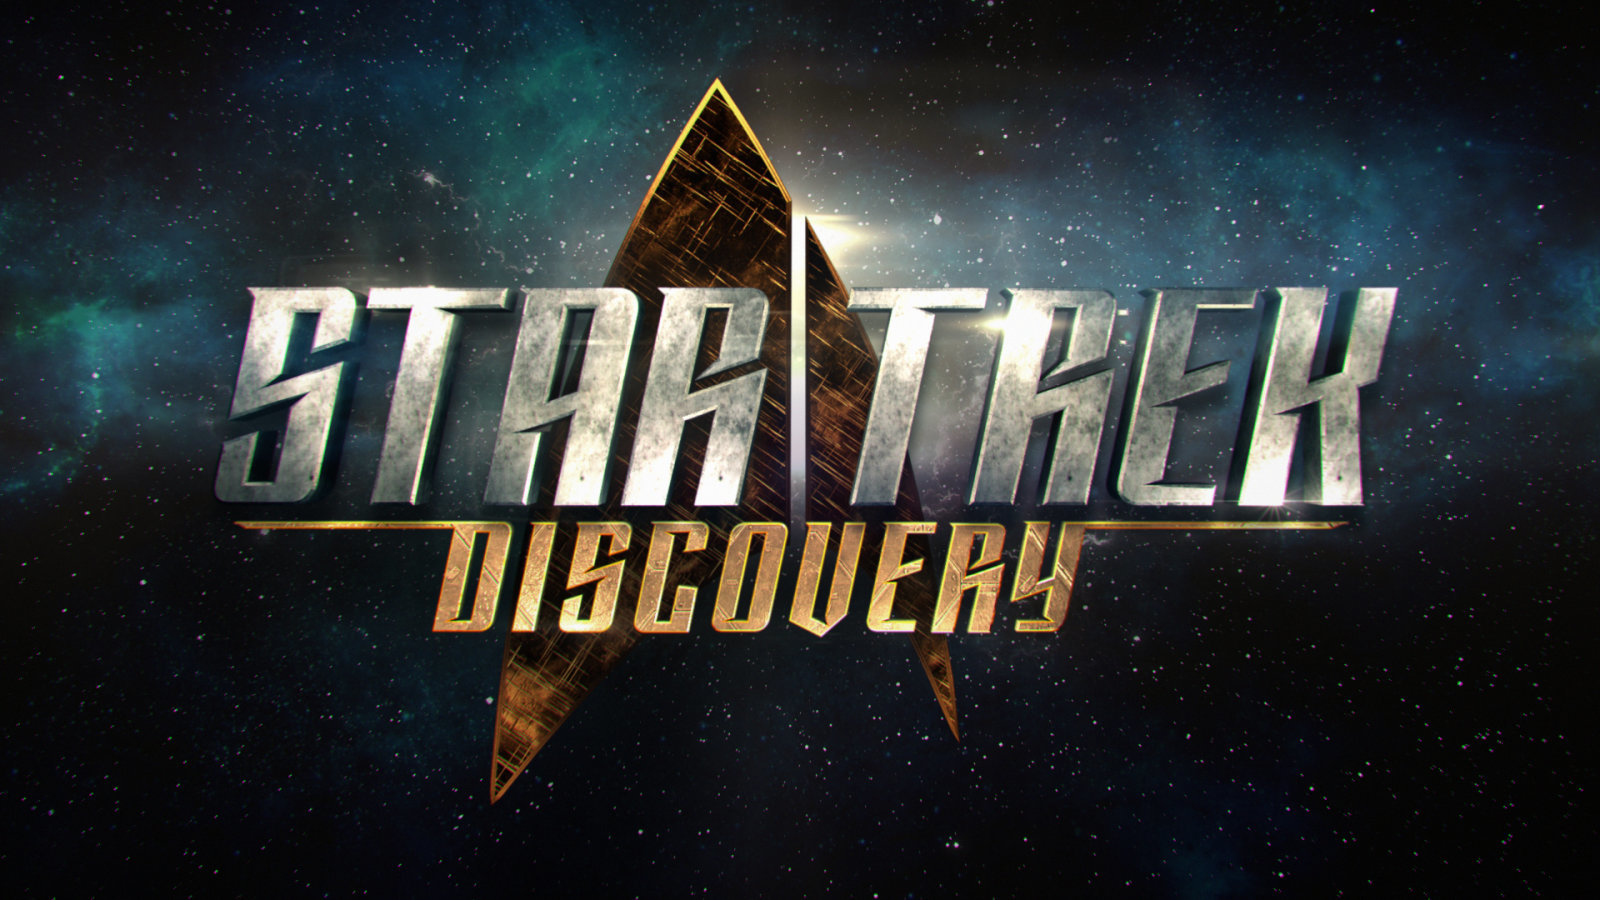 Production On Star Trek Discovery Is Finally Underway